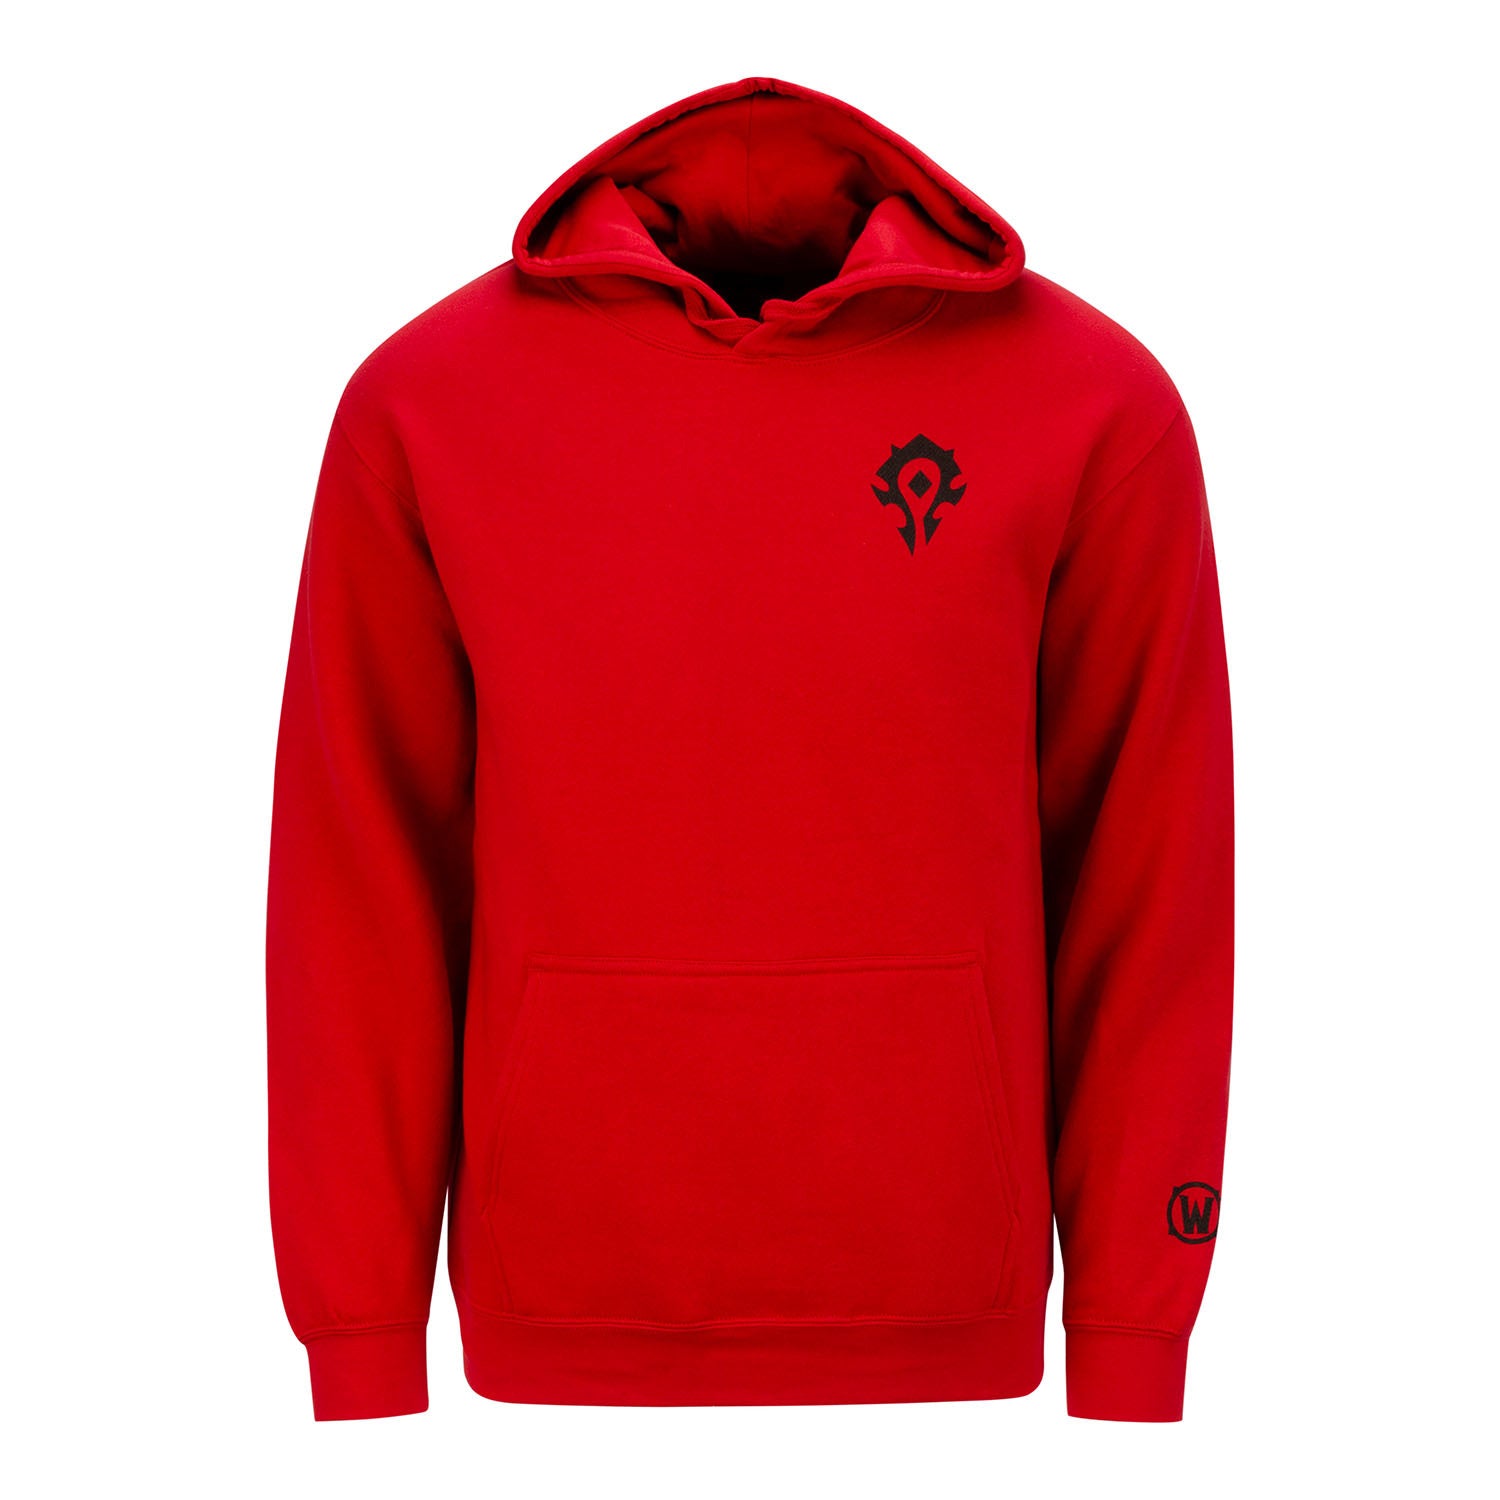 World of Warcraft Horde Red Hoodie - Front View